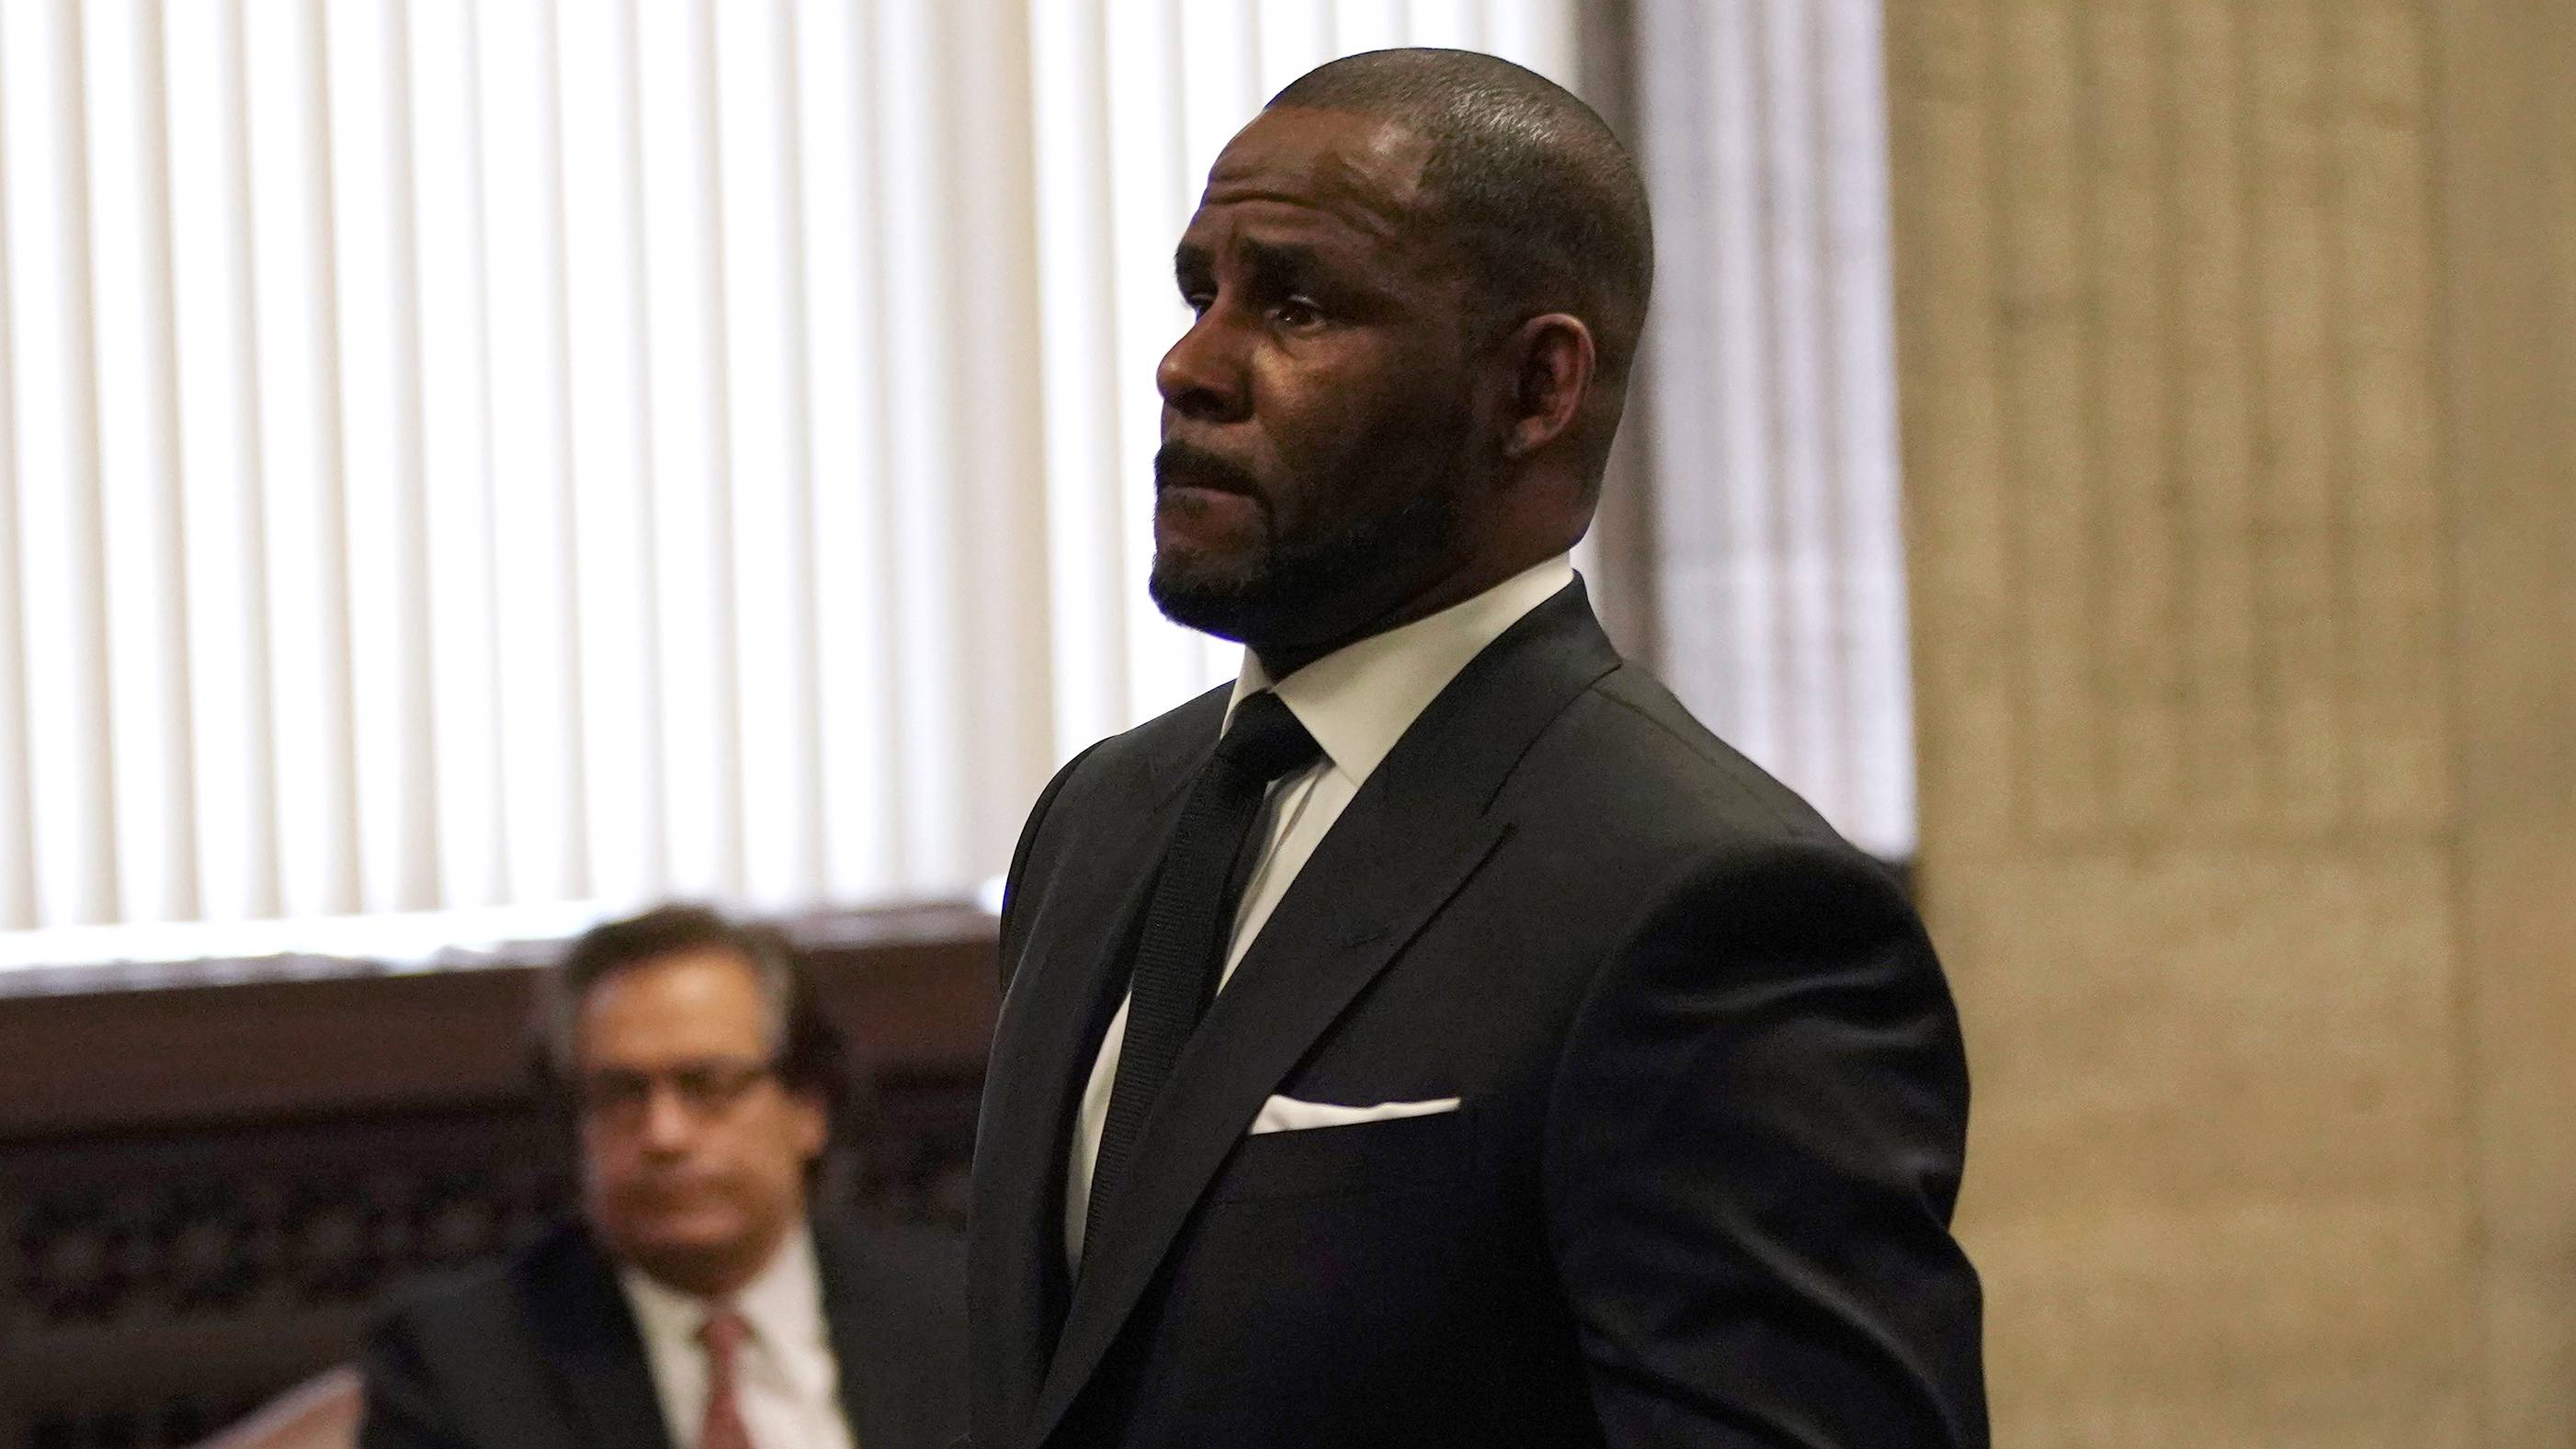 R. Kelly Is Not Father Of Joycelyn Savage’s Unborn Baby, Lawyer Says